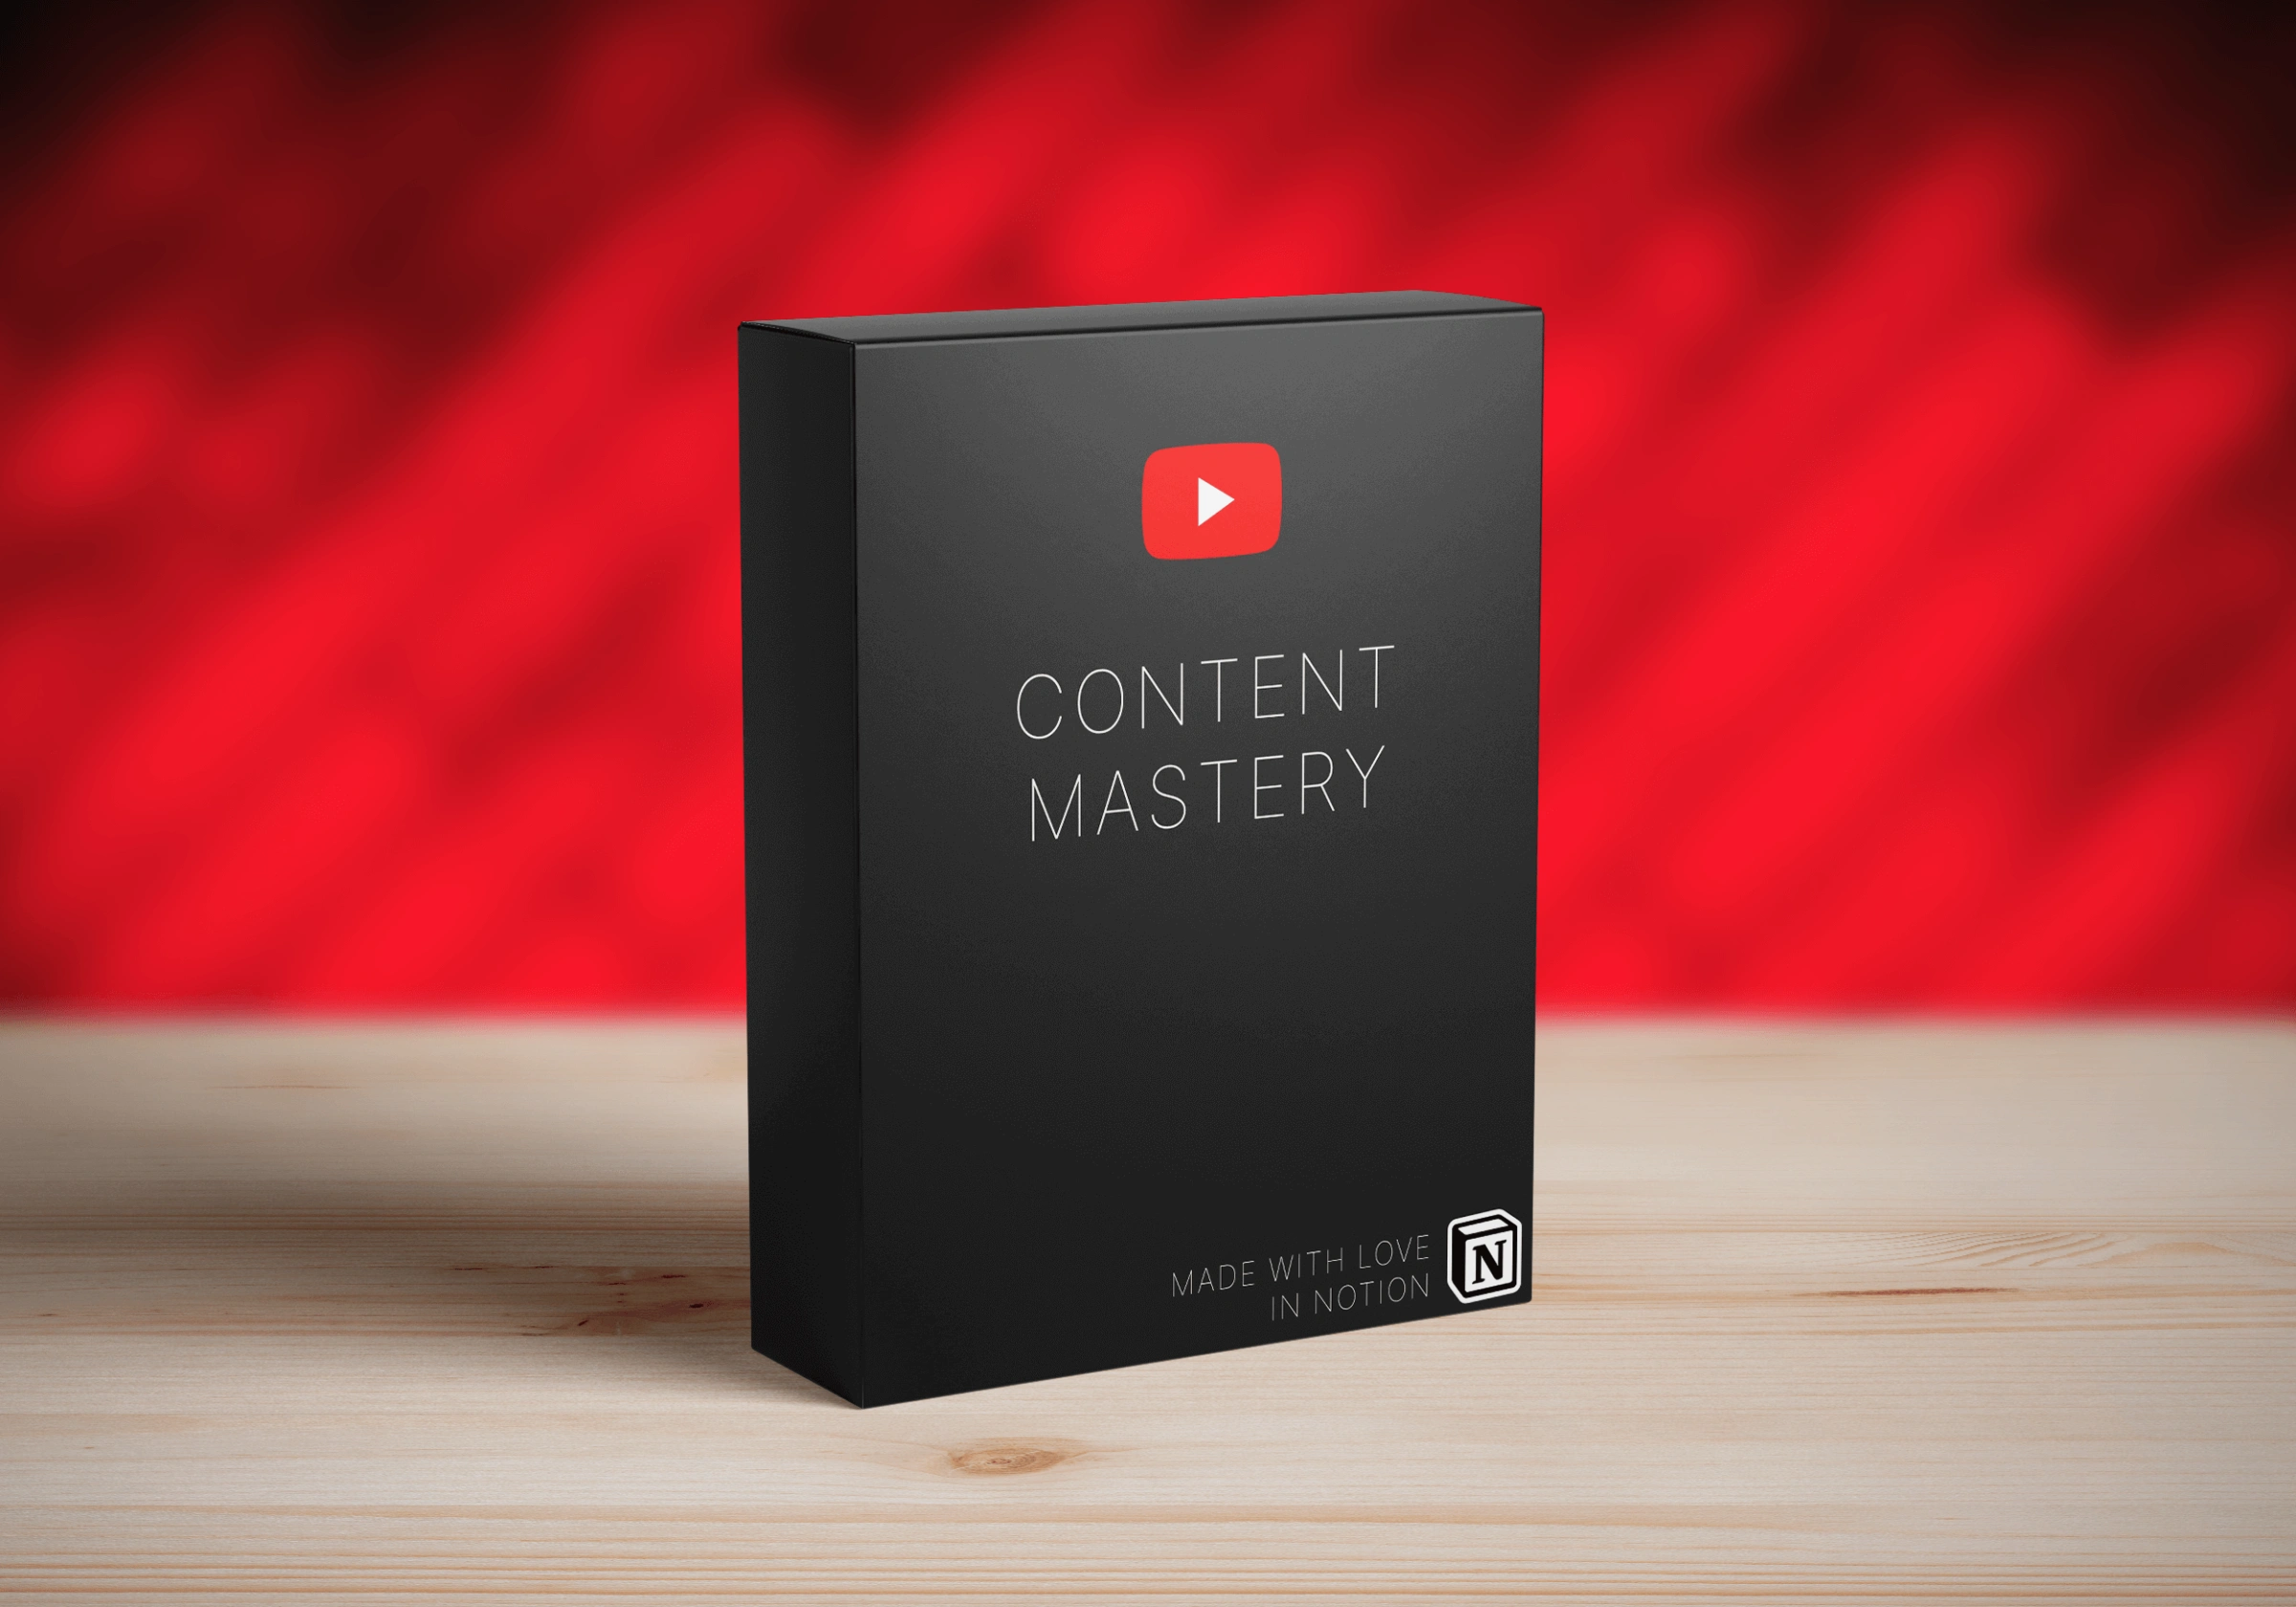 Content Mastery